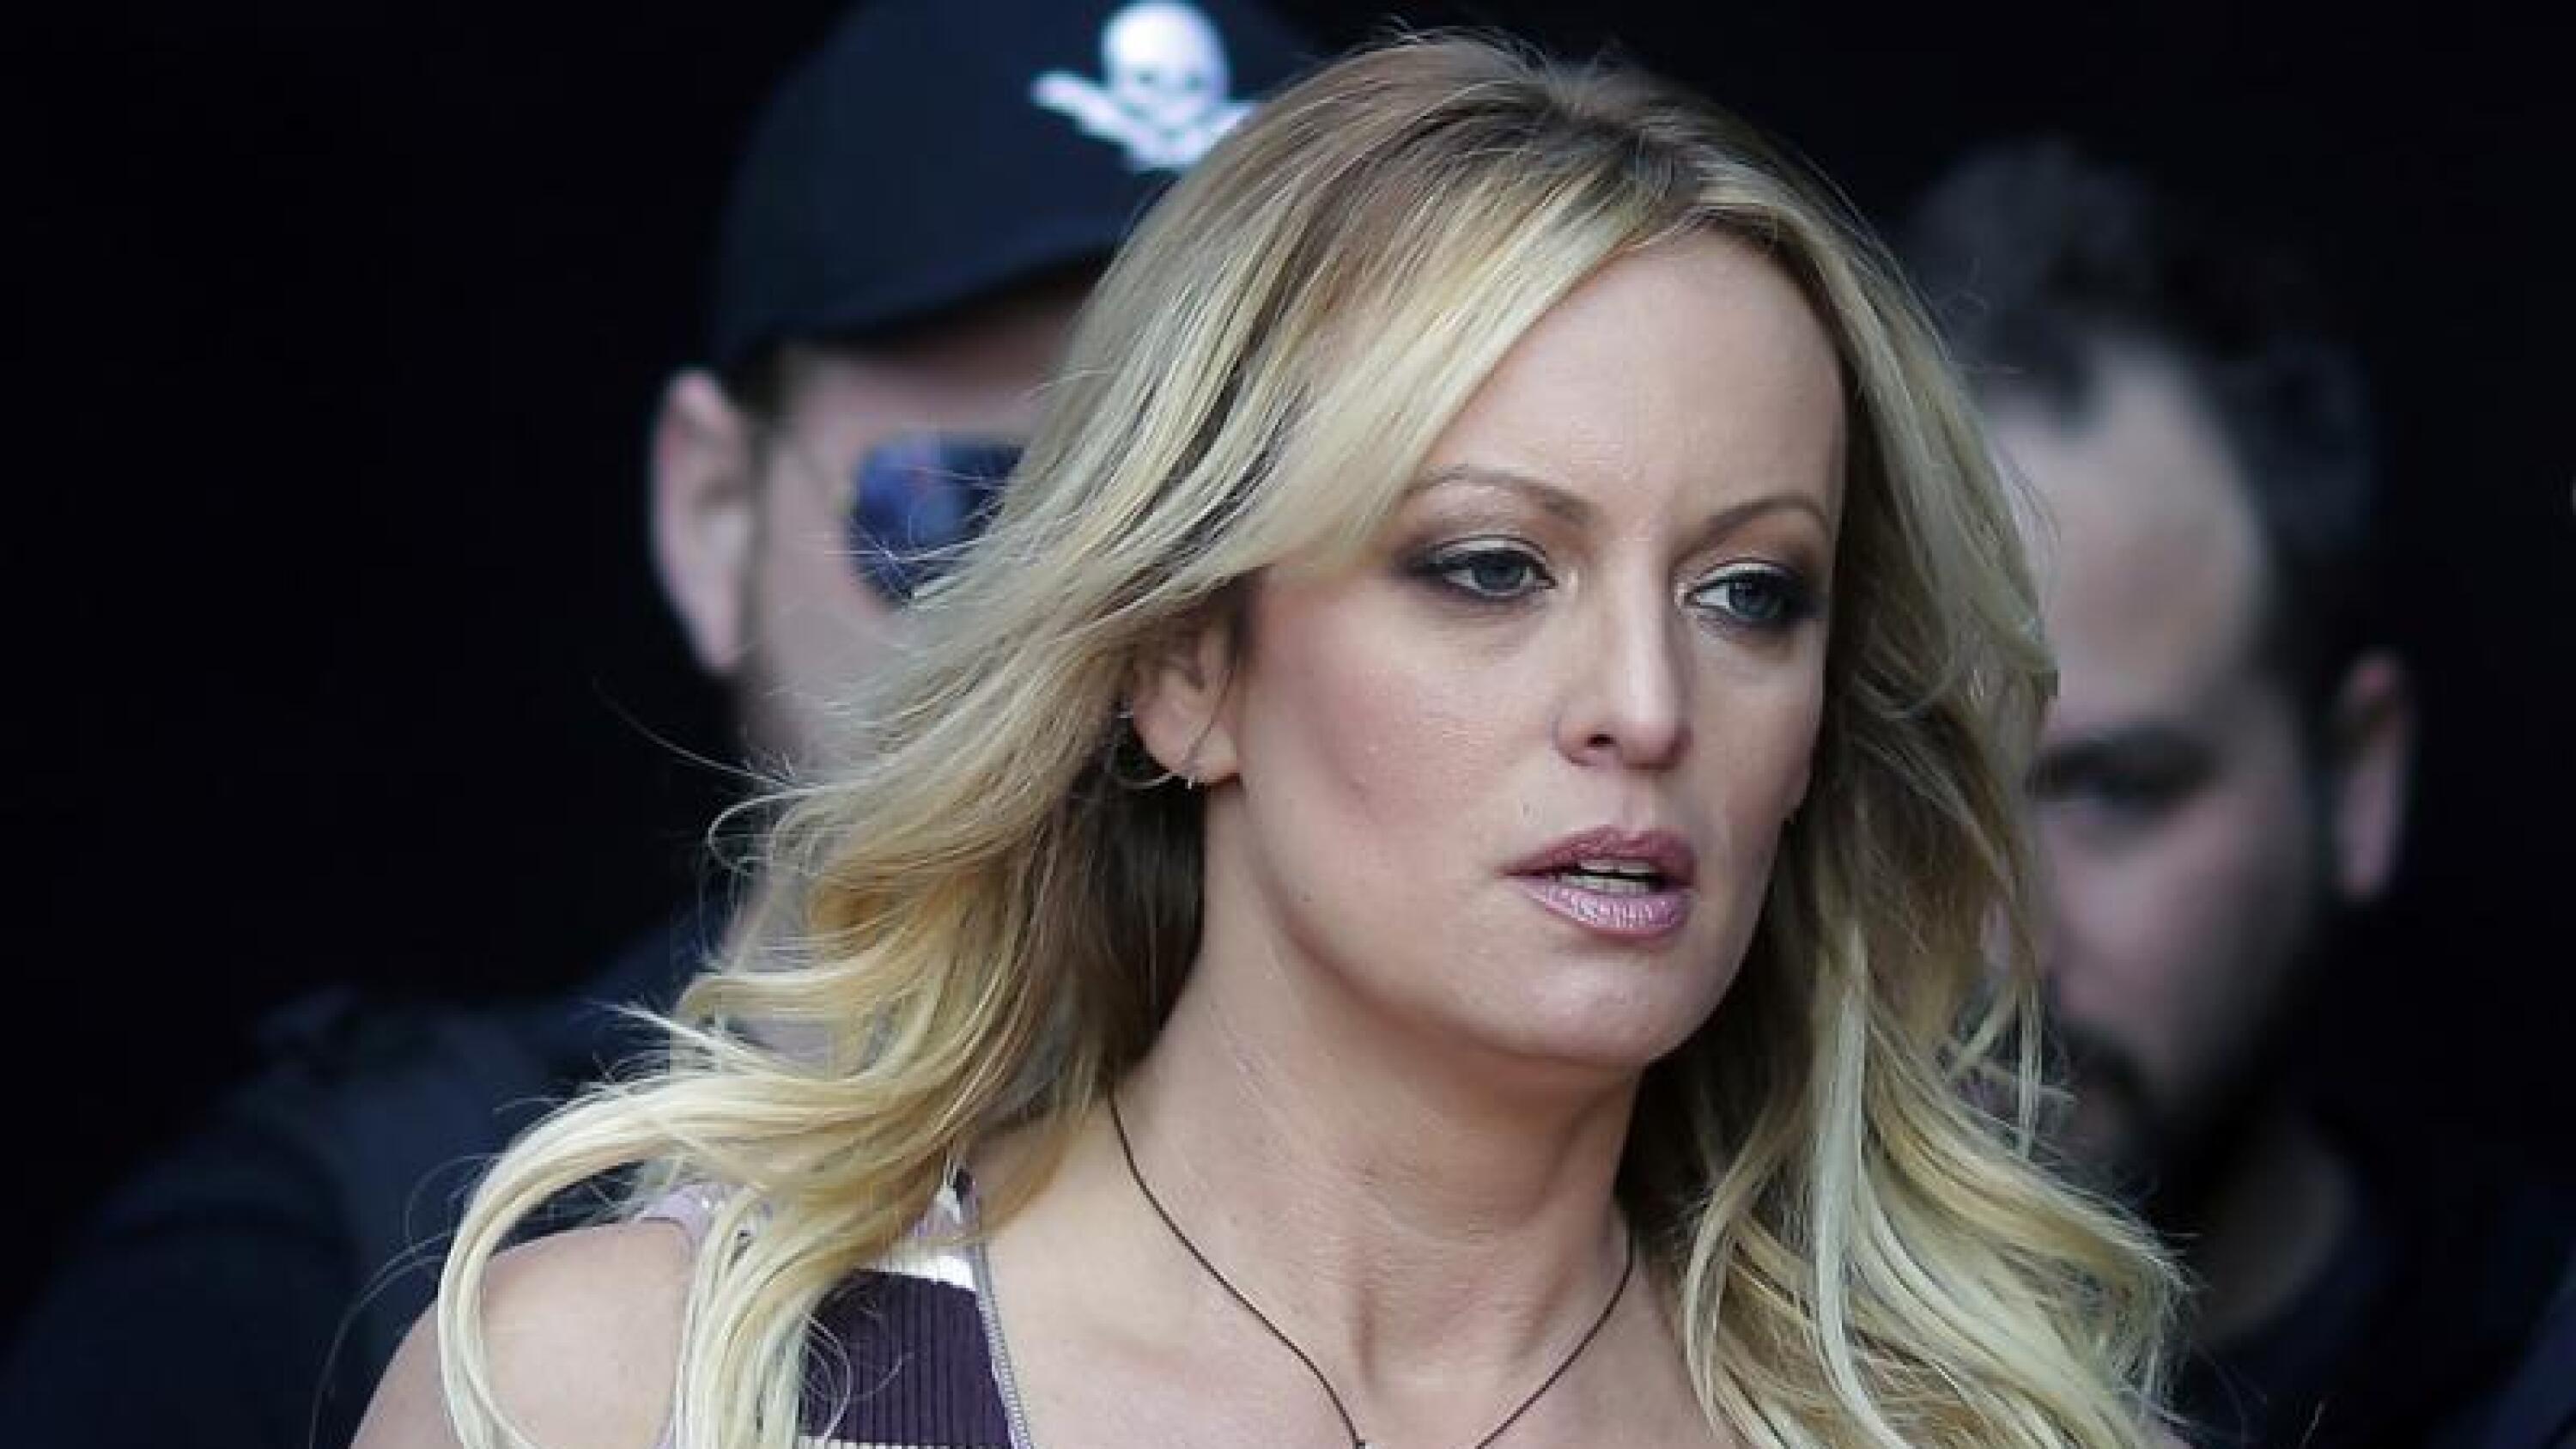 Porn performer Stormy Daniels is called to the witness stand at Donald Trump's hush money trial